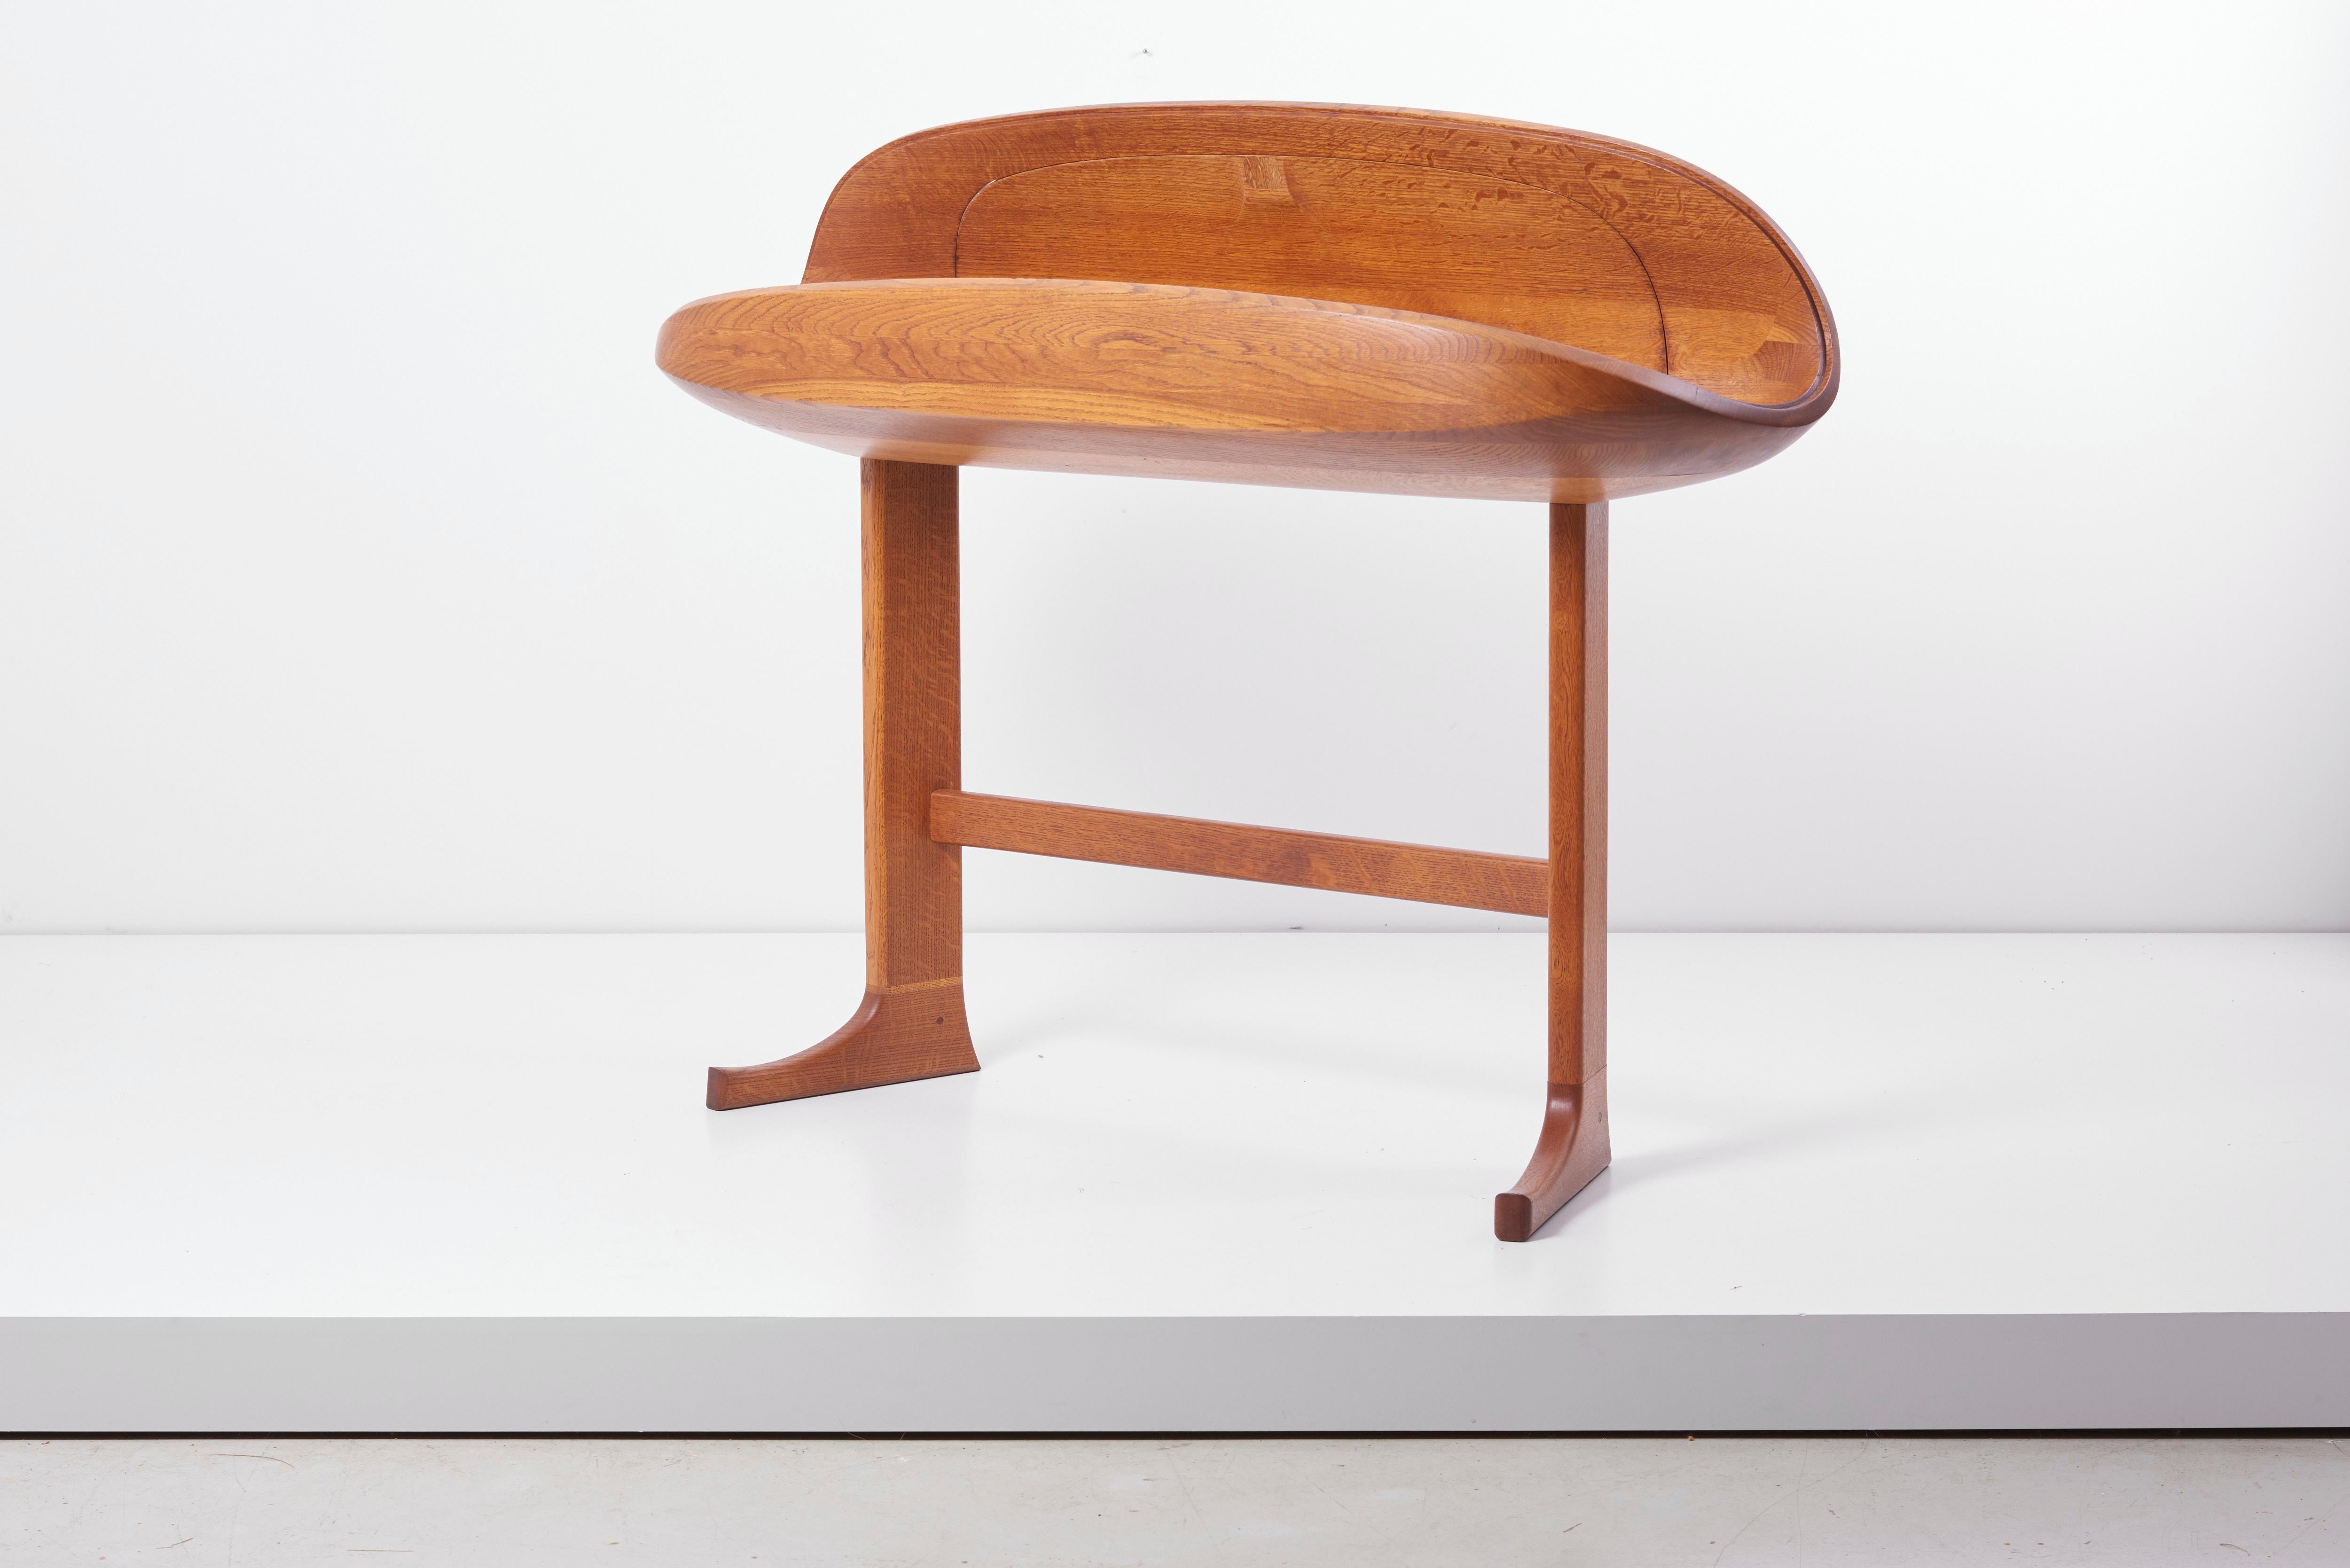 Unique sculptural display case in oak from 1965 by craftsmen Donald Lloyd Mckinley (signed). Glass dome is missing (needs a rear window from a 1954s Plymouth).